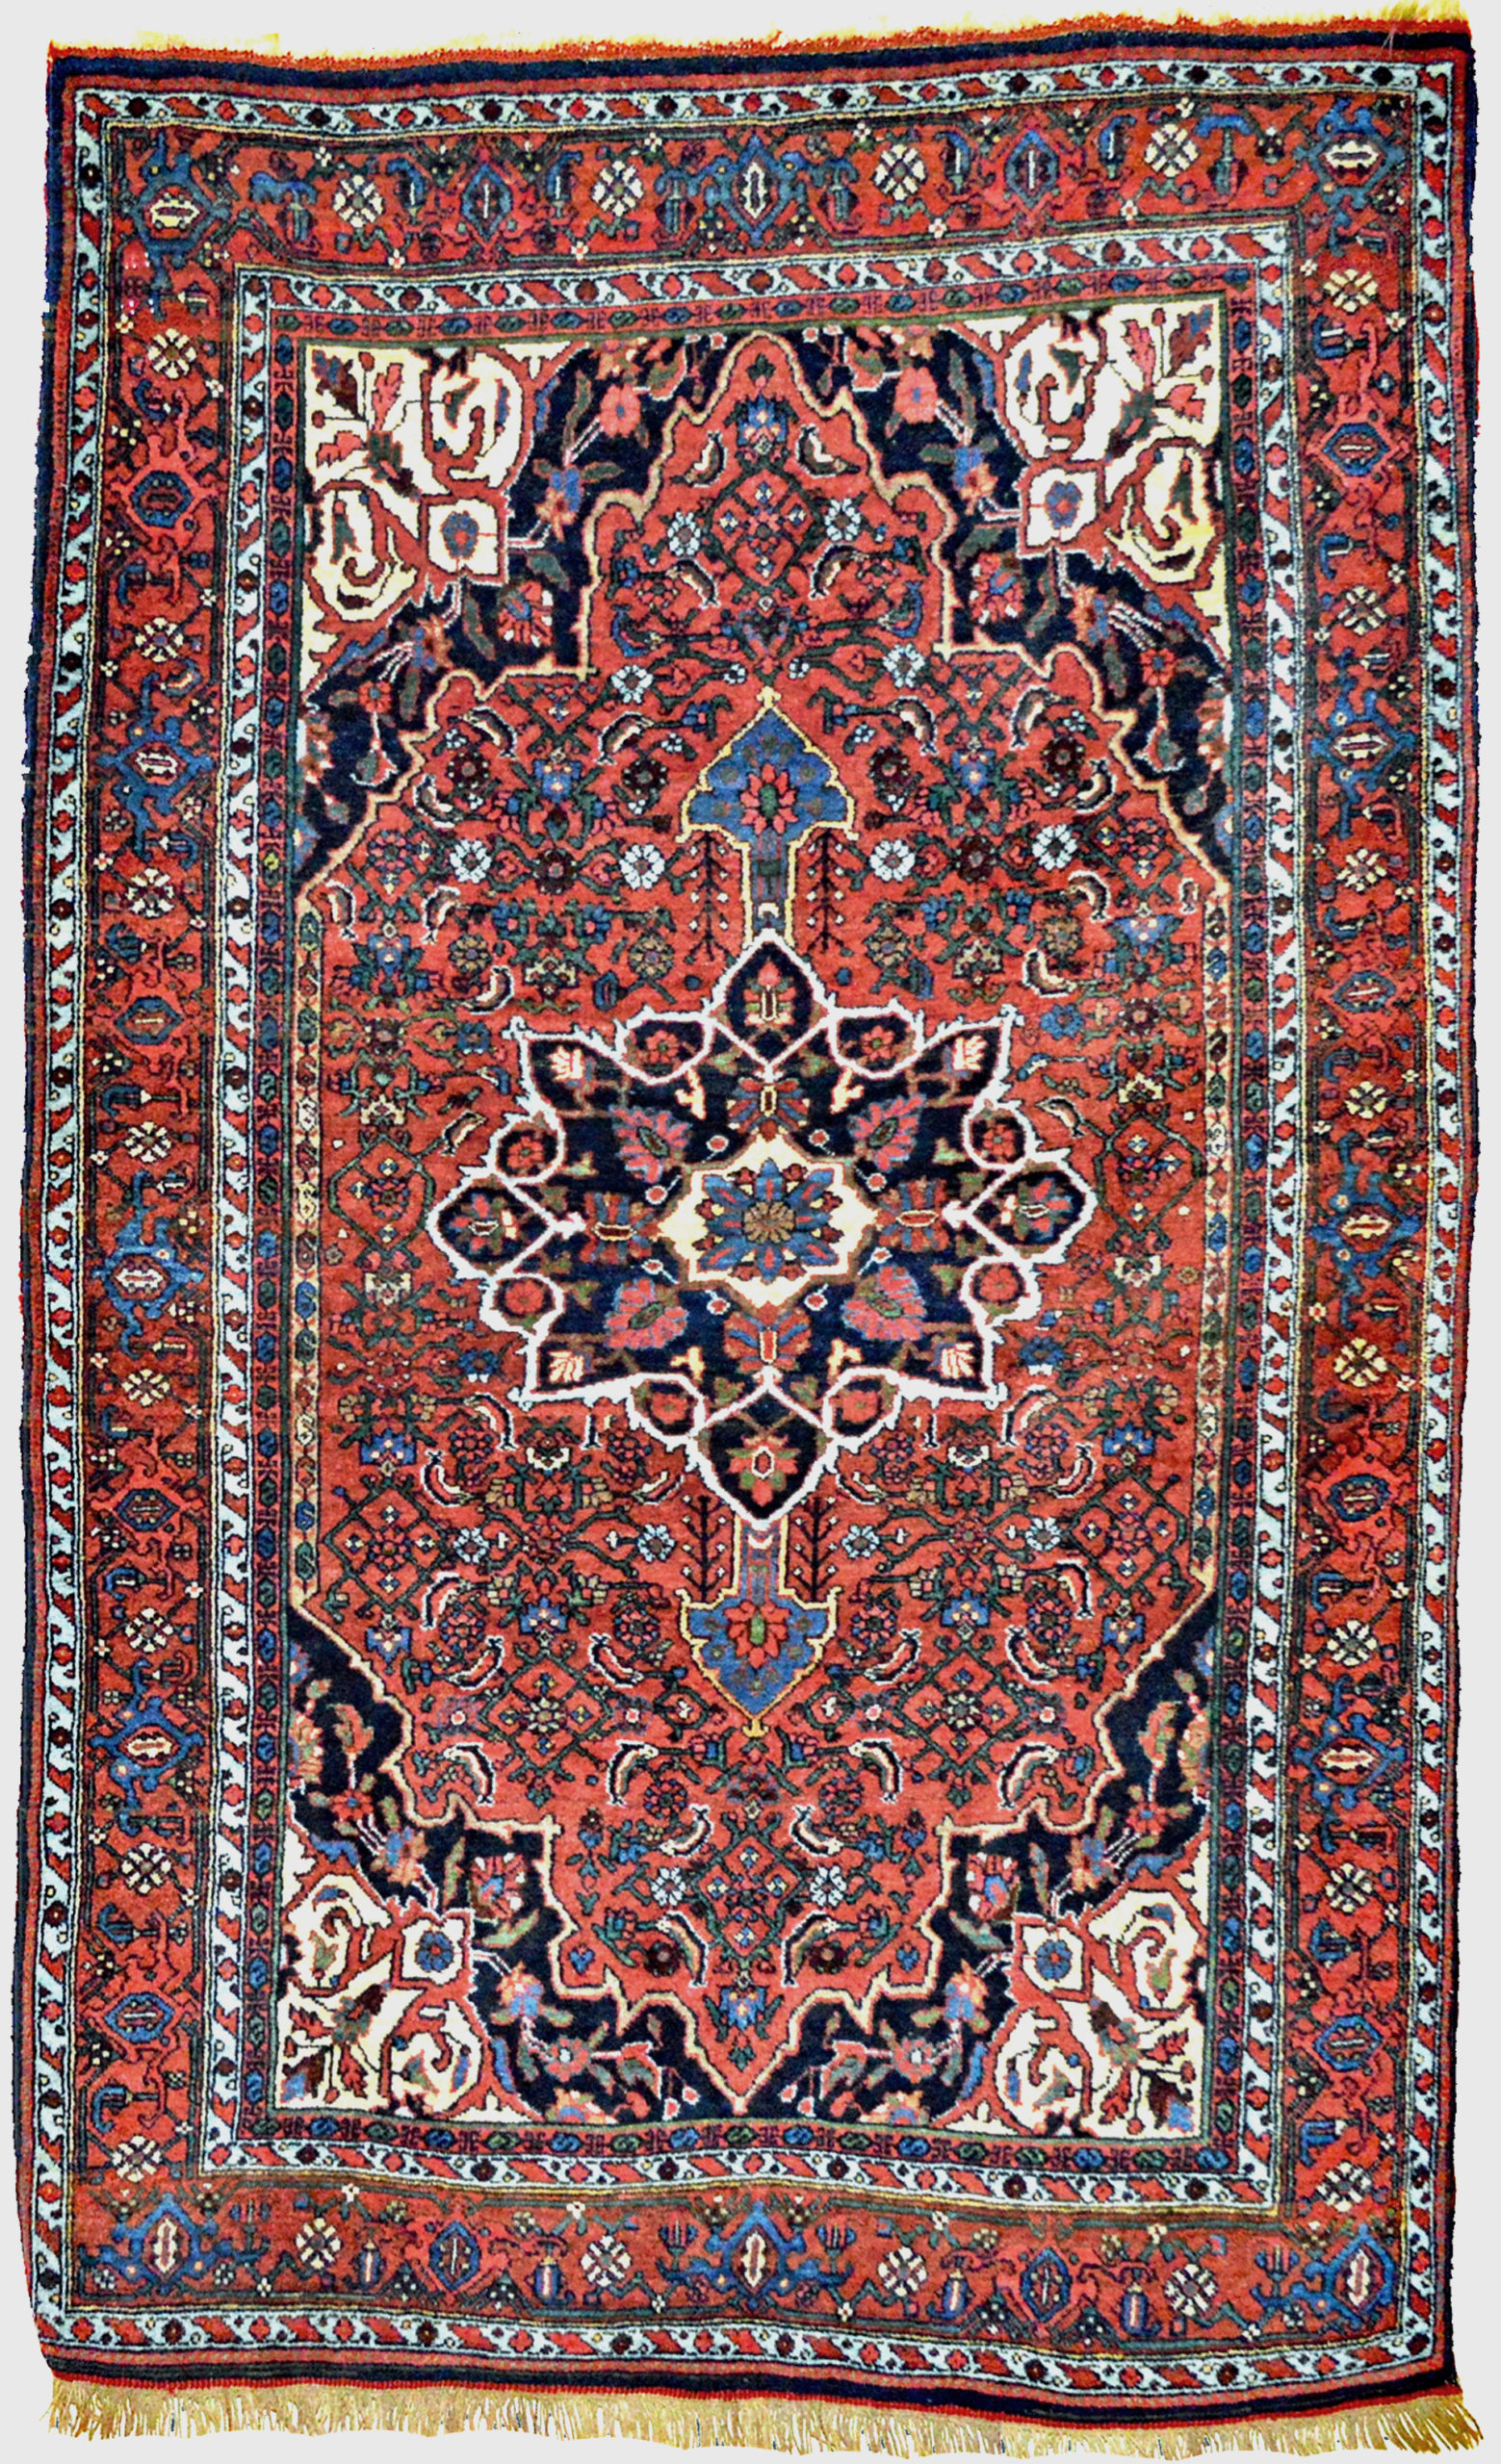 Antique Persian Bidjar rug with a brick red field decorated with the Herati design